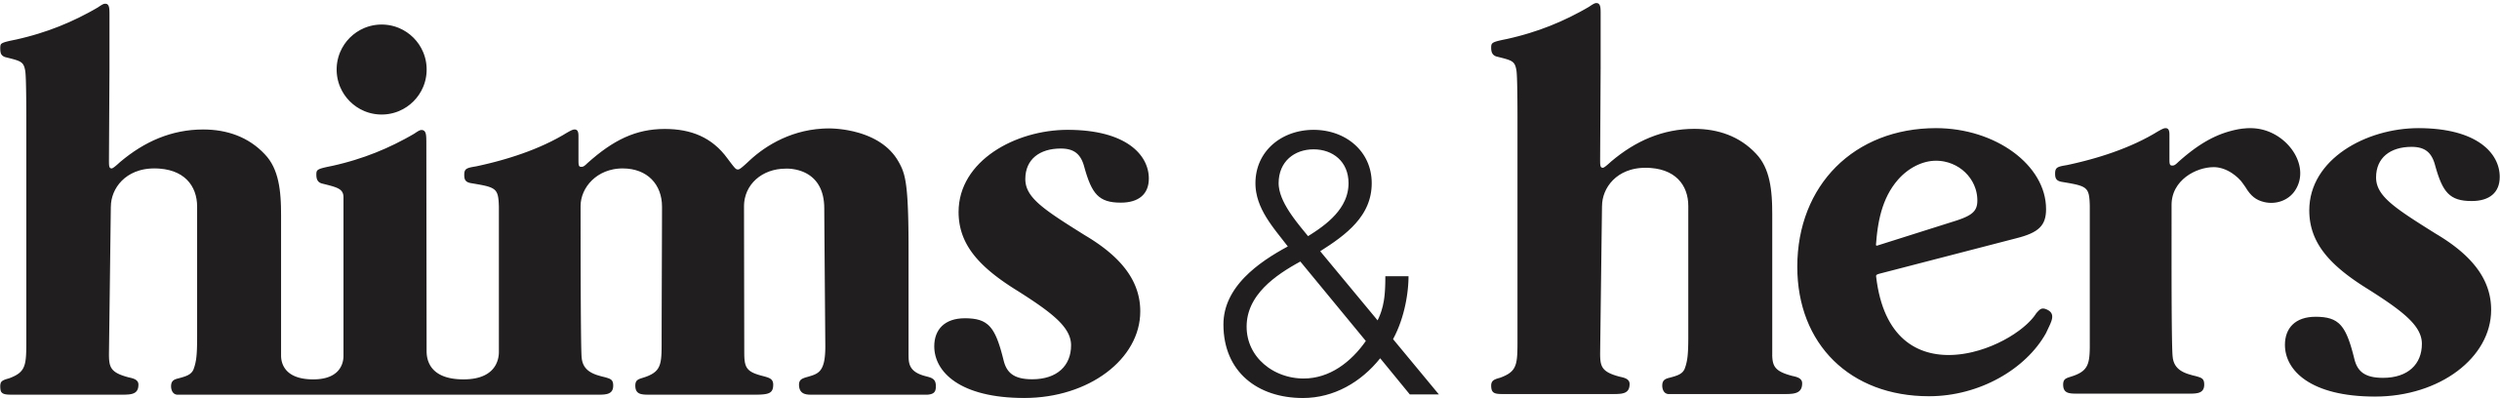 Hims & Hers logo.png